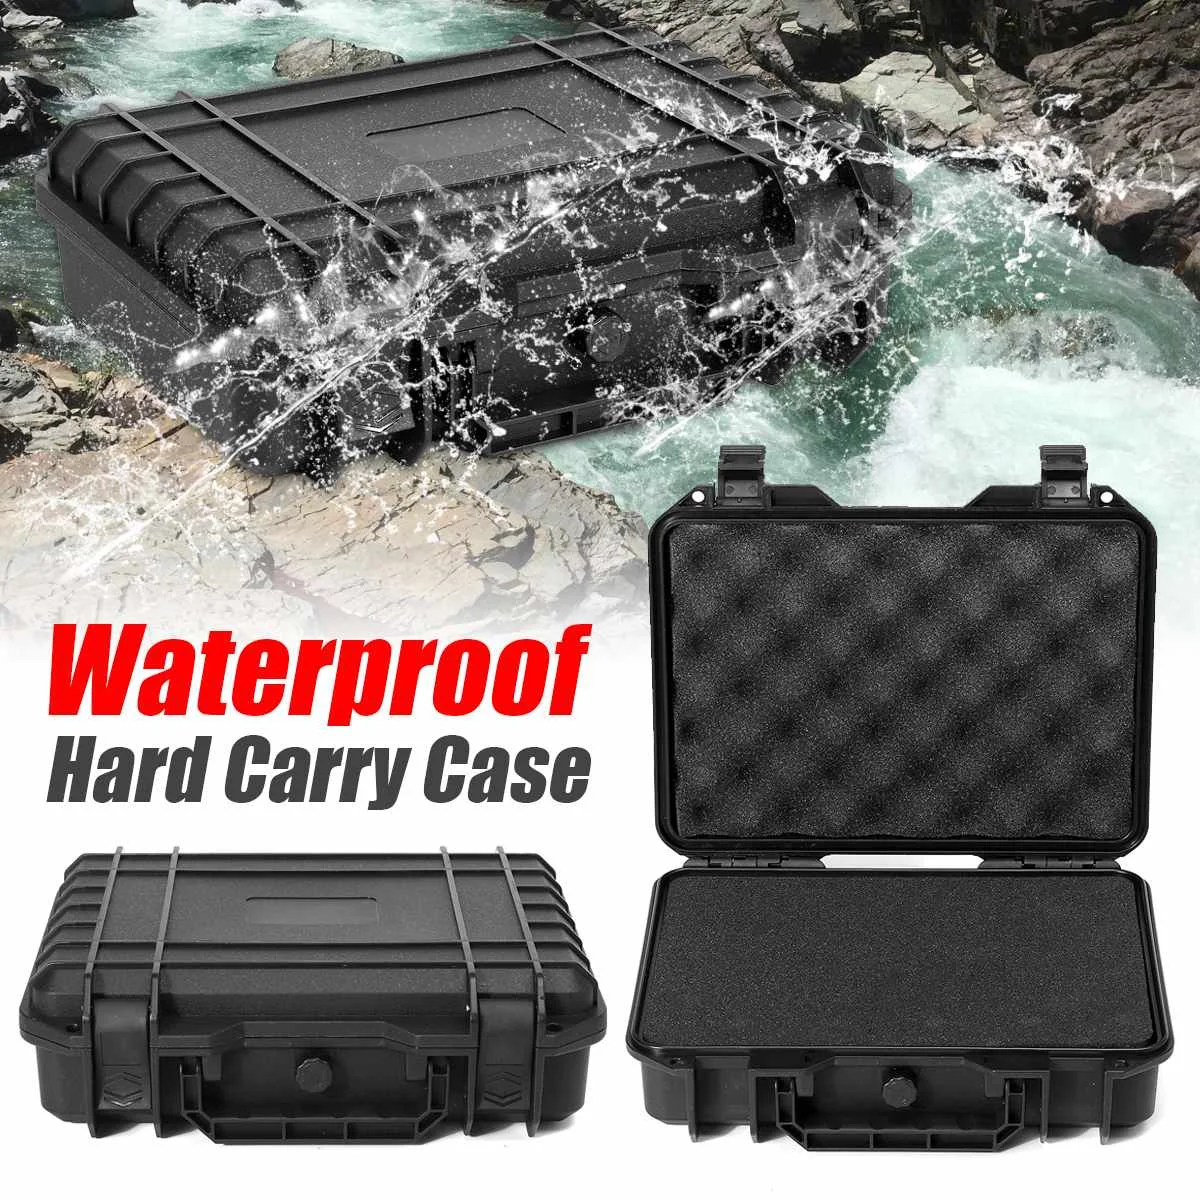 5 Sizes Waterproof Hard Carry Case Bag Tool Kits Equipment Case with Sponge Storage Box Safety Protector Organizer Hardware